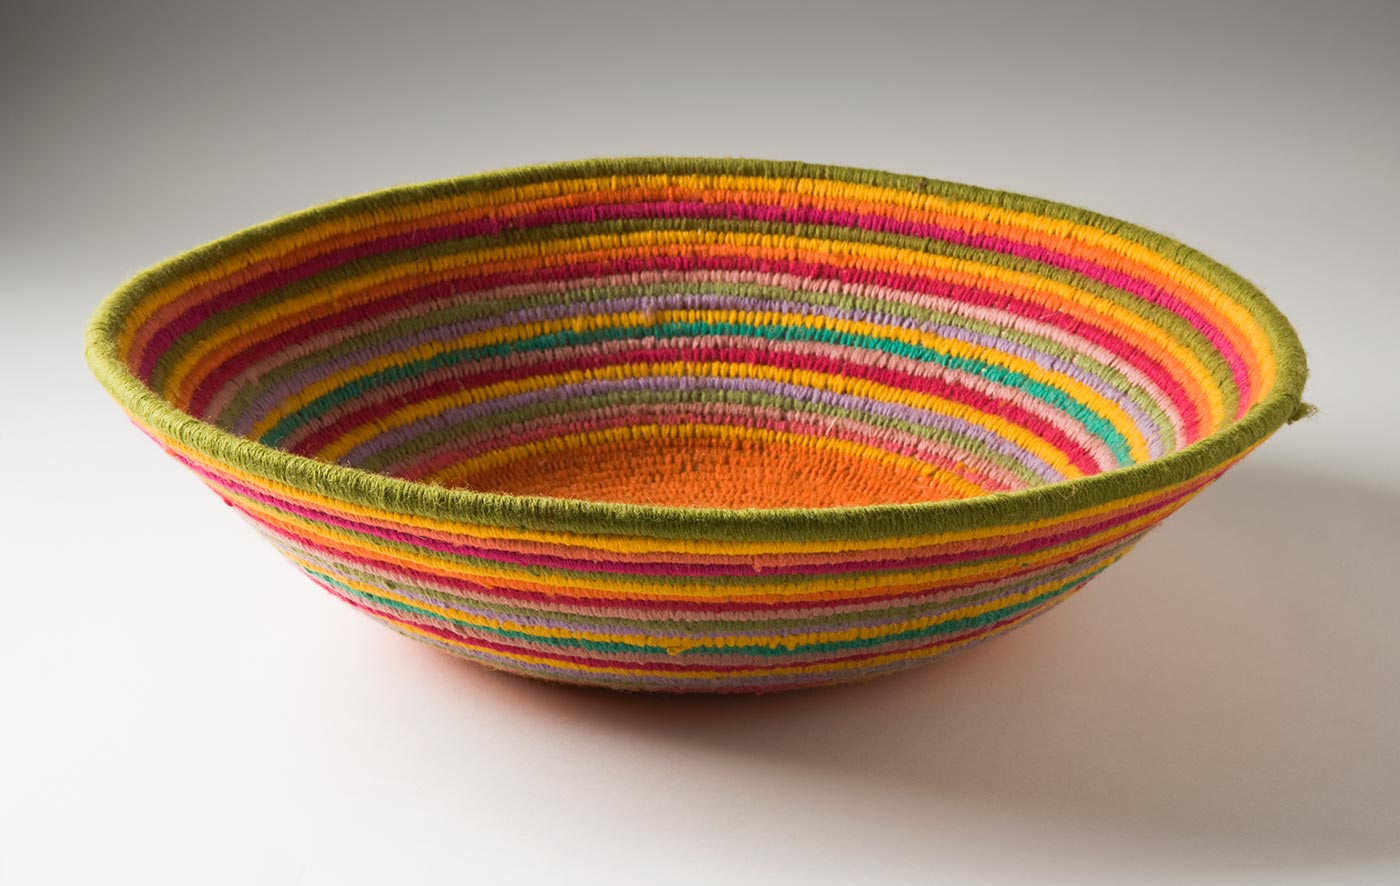 A multi-coloured circular coiled bowl-shaped basket made of yarn and plant fibre. The centre of the basket is in orange yarn which persists out to where the edges start to turn up. The rest of the basket is in horizontal stripes of yellow, dark pink, light pink, lime green and lavender yarn. - click to view larger image